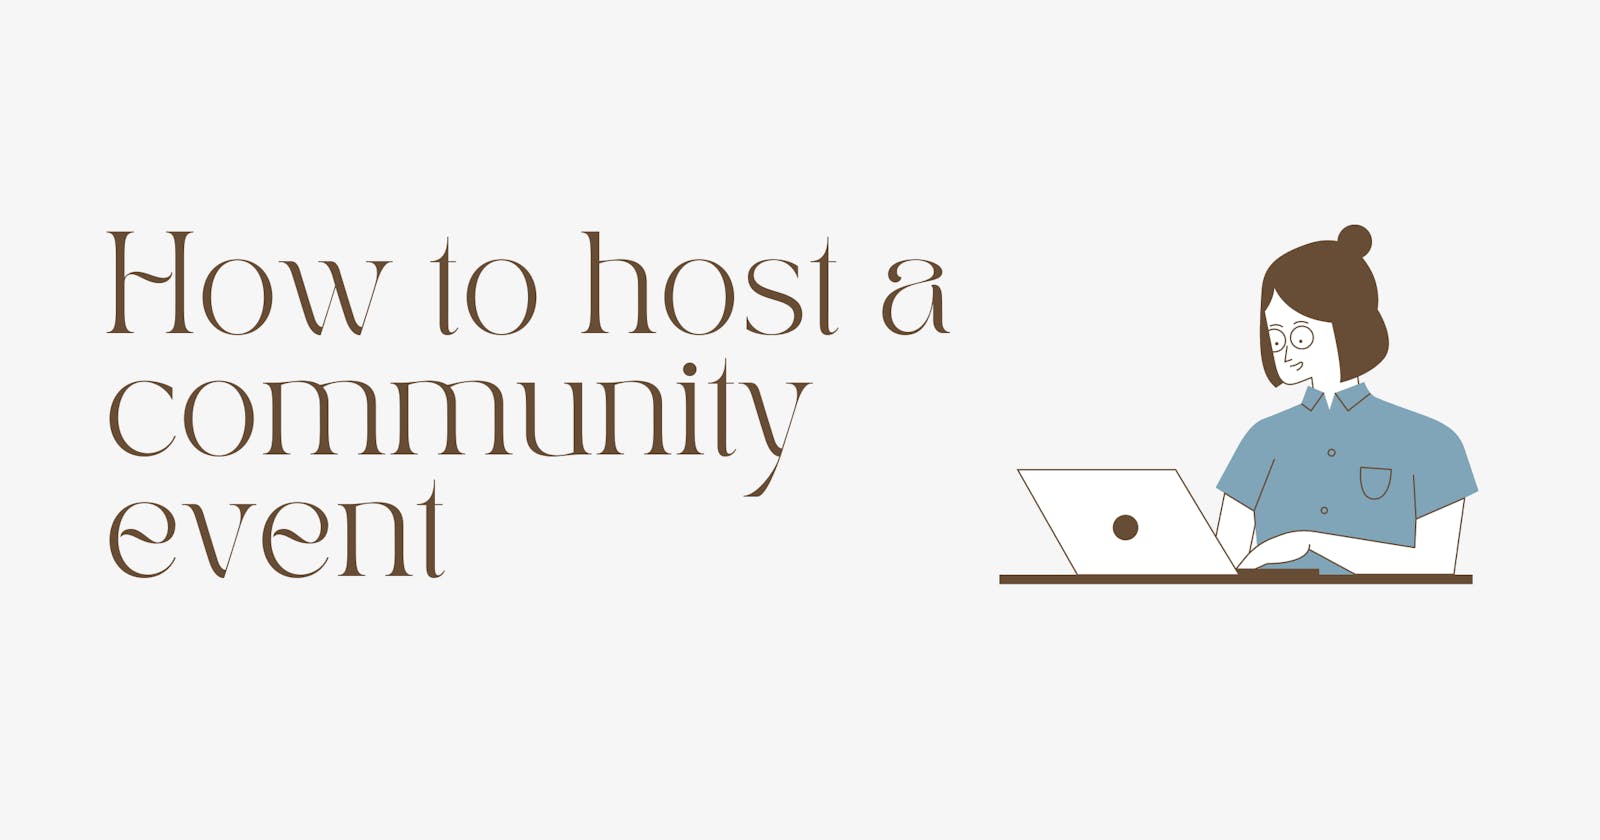 How to host a community event